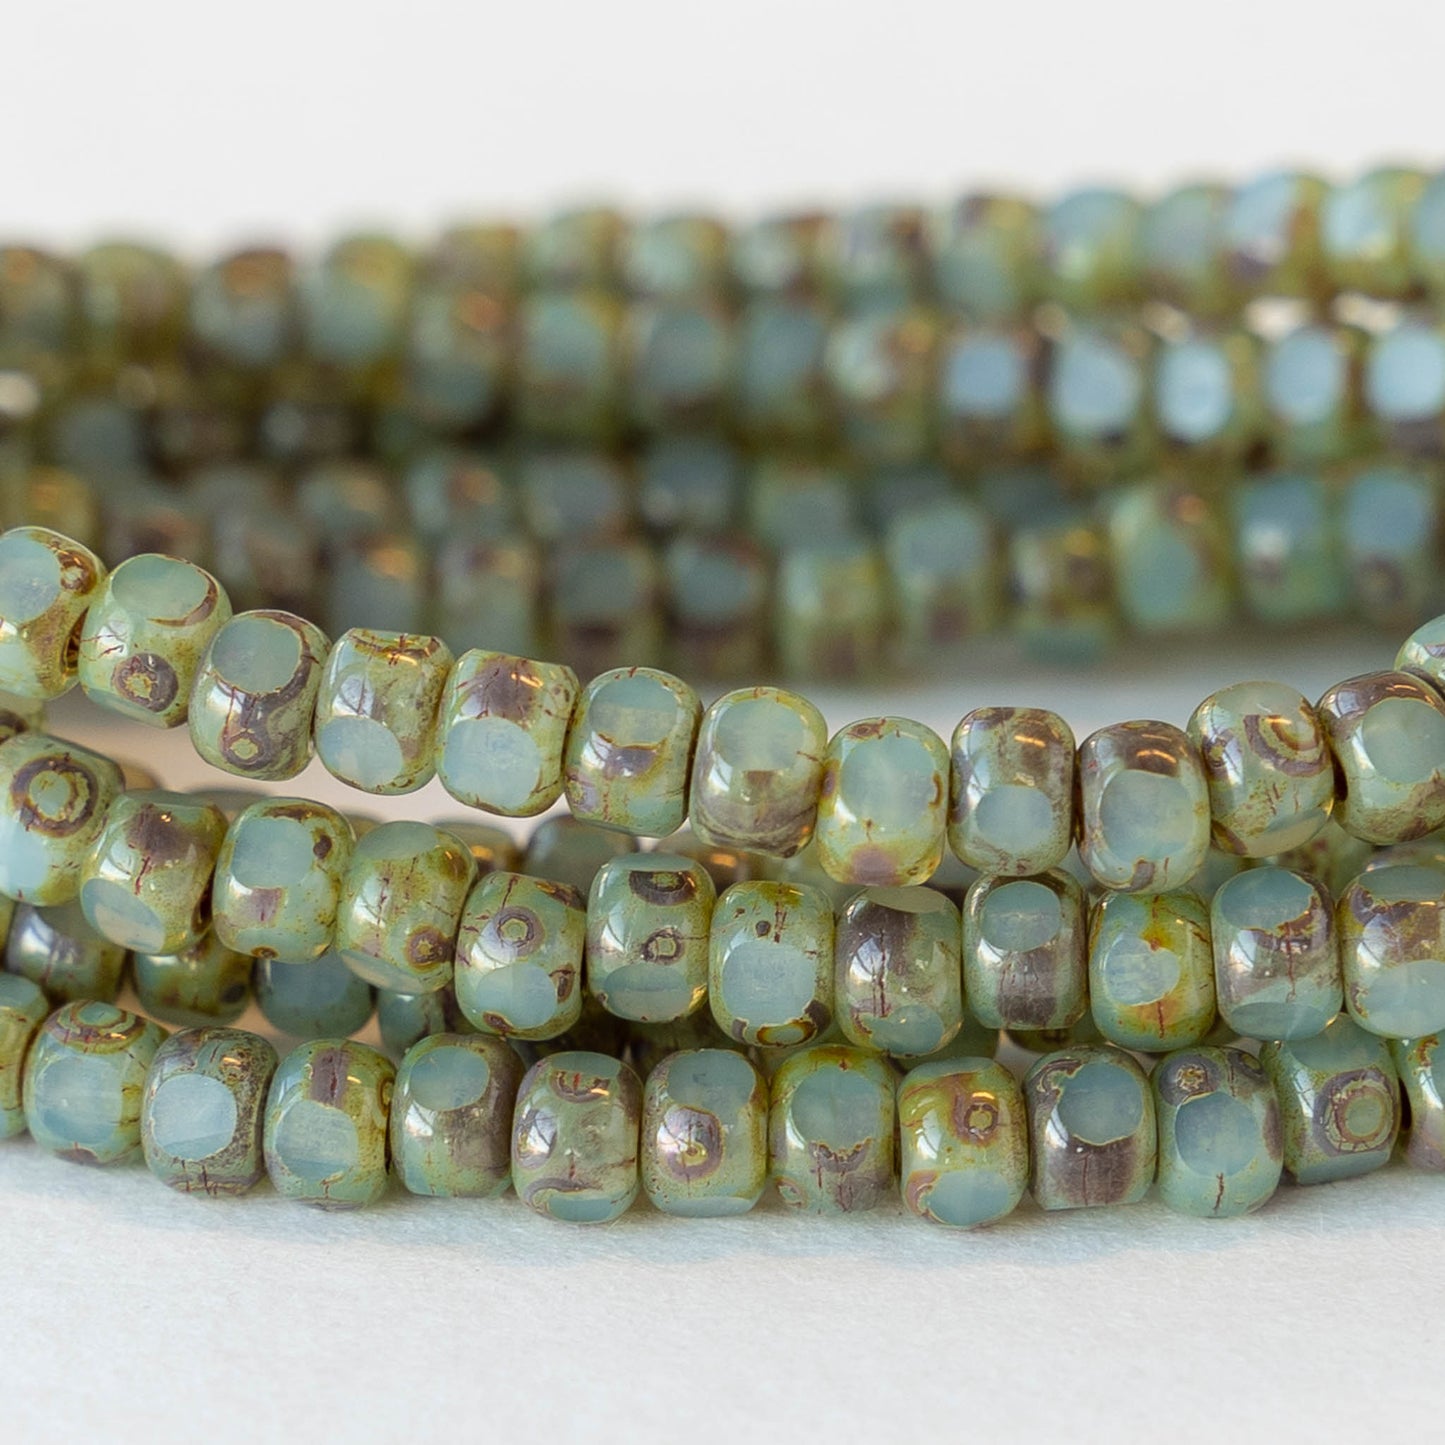 Size 6 Tri-cut Beads - Opaline Sea Green with a Picasso Finish - 50 beads